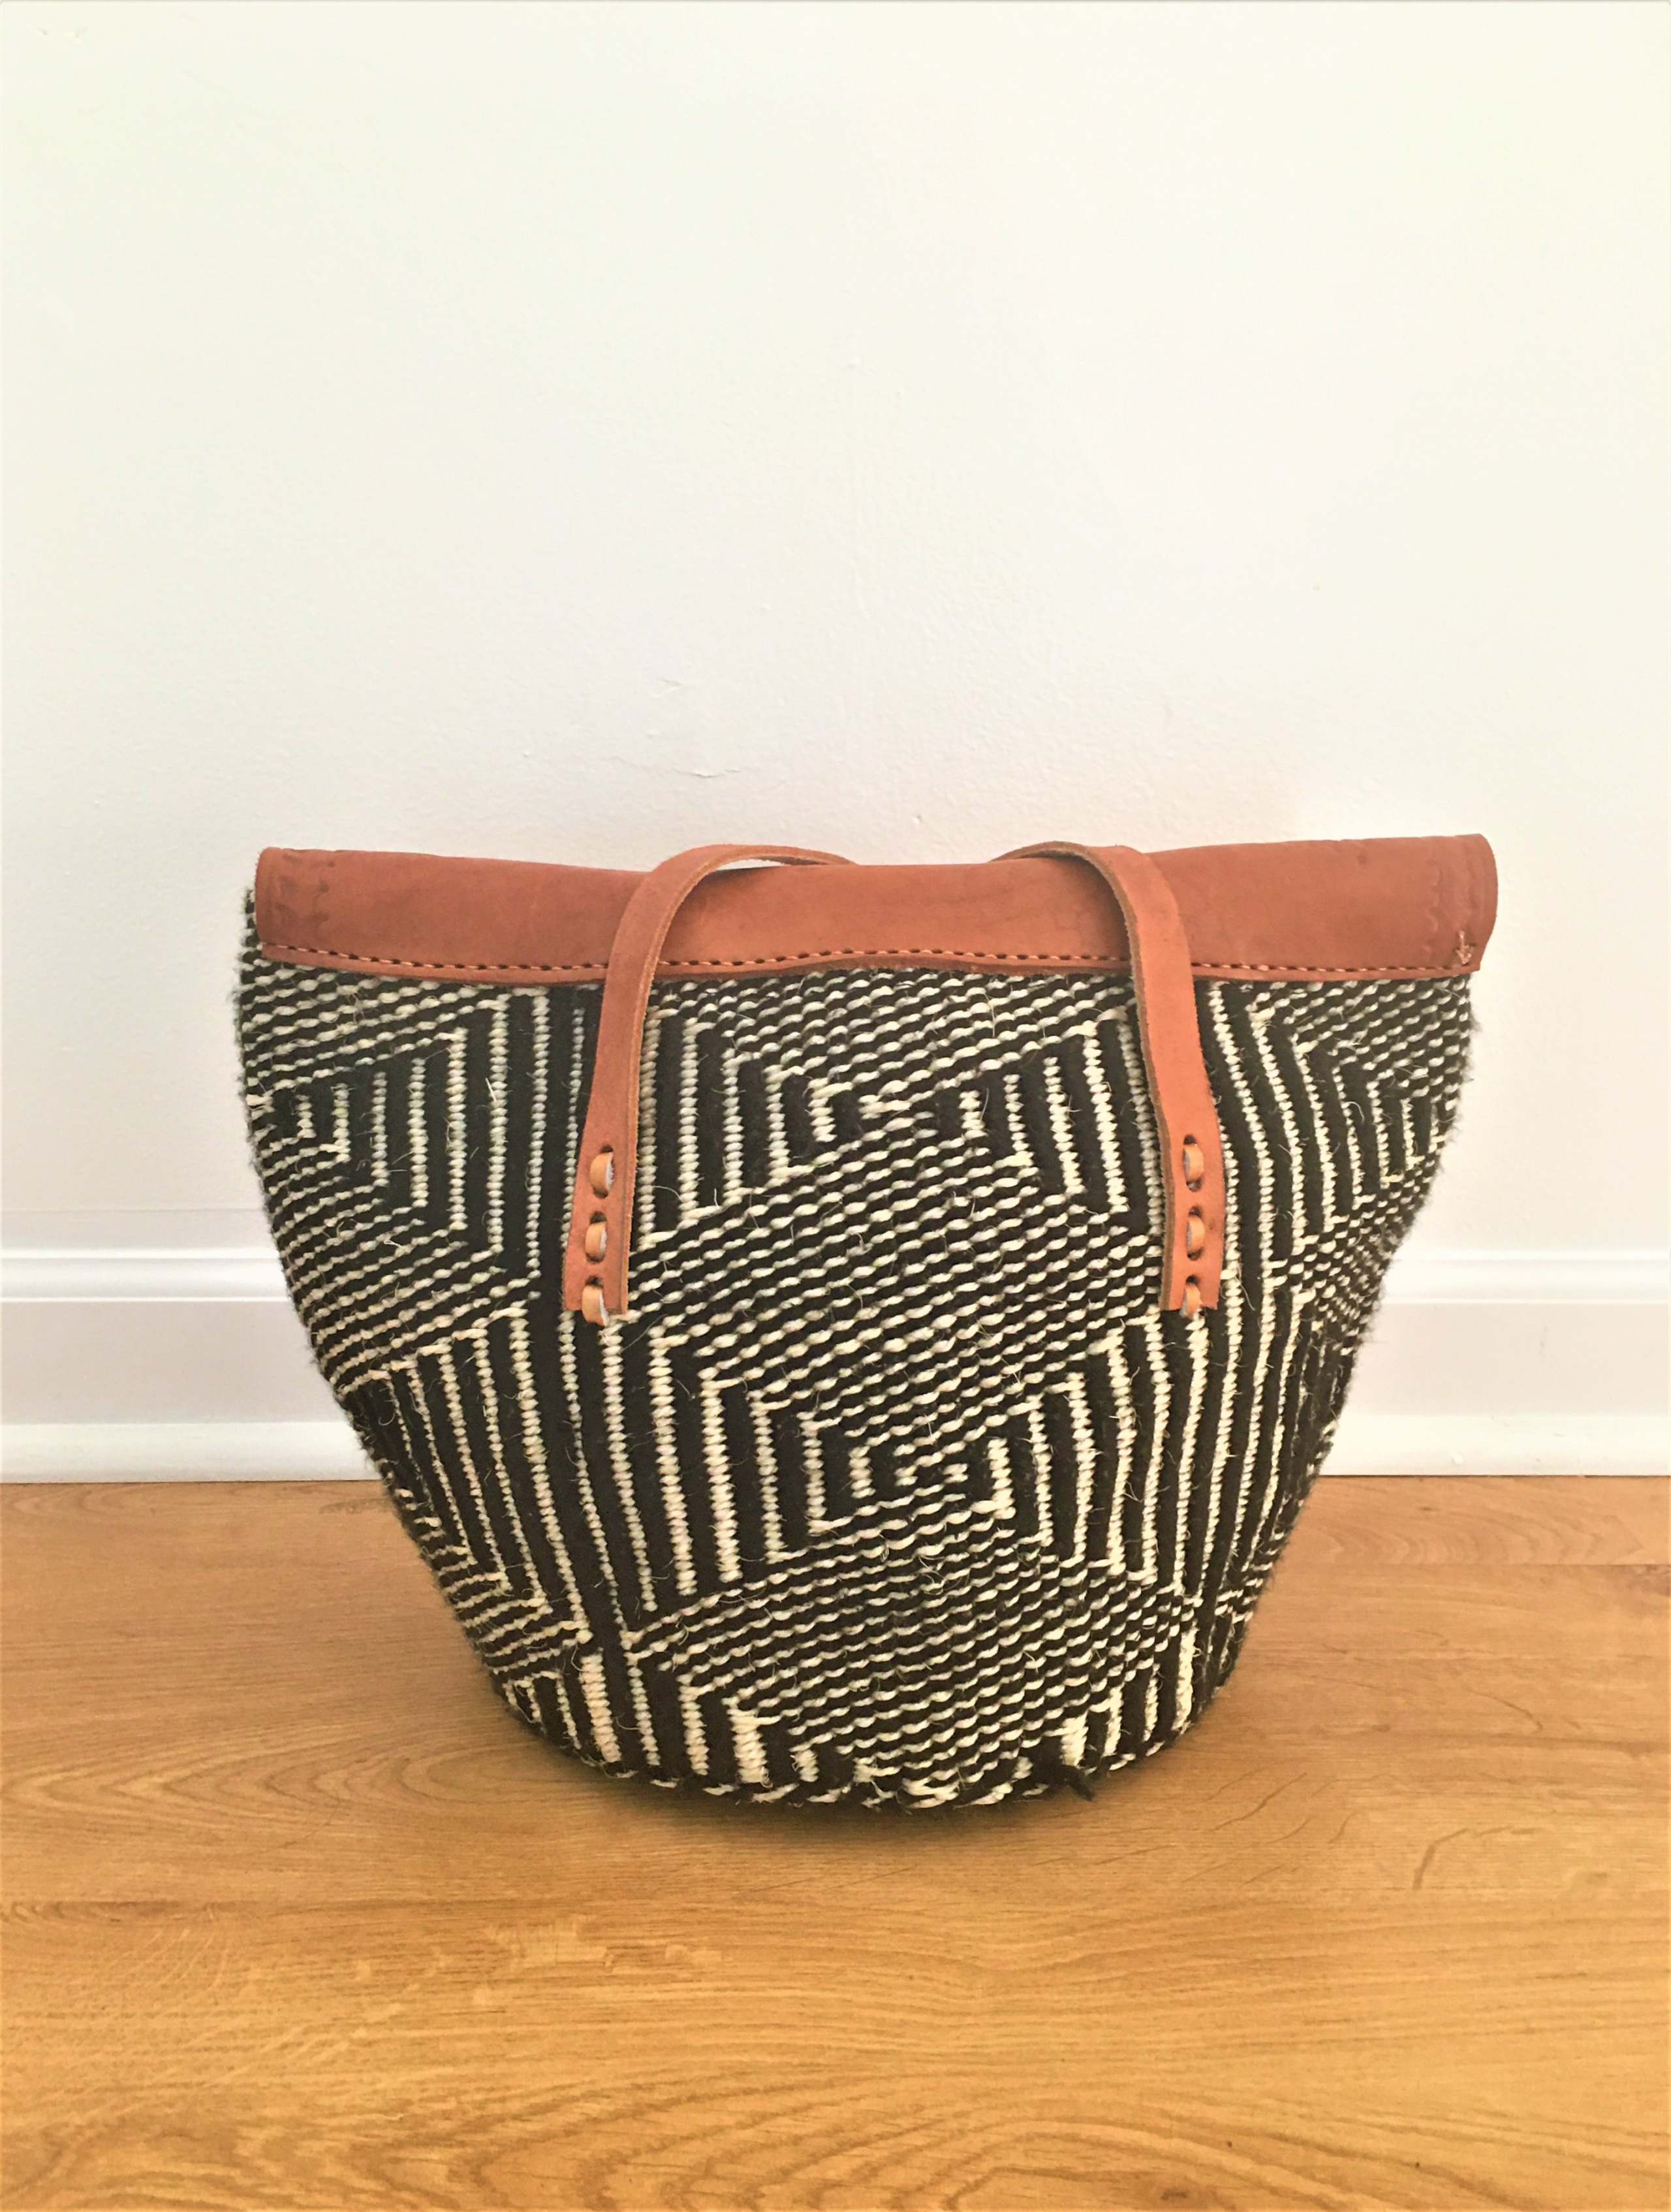 Handmade Large Sisal Tote with Leather Handles Kenya - Cultural Cloth Store